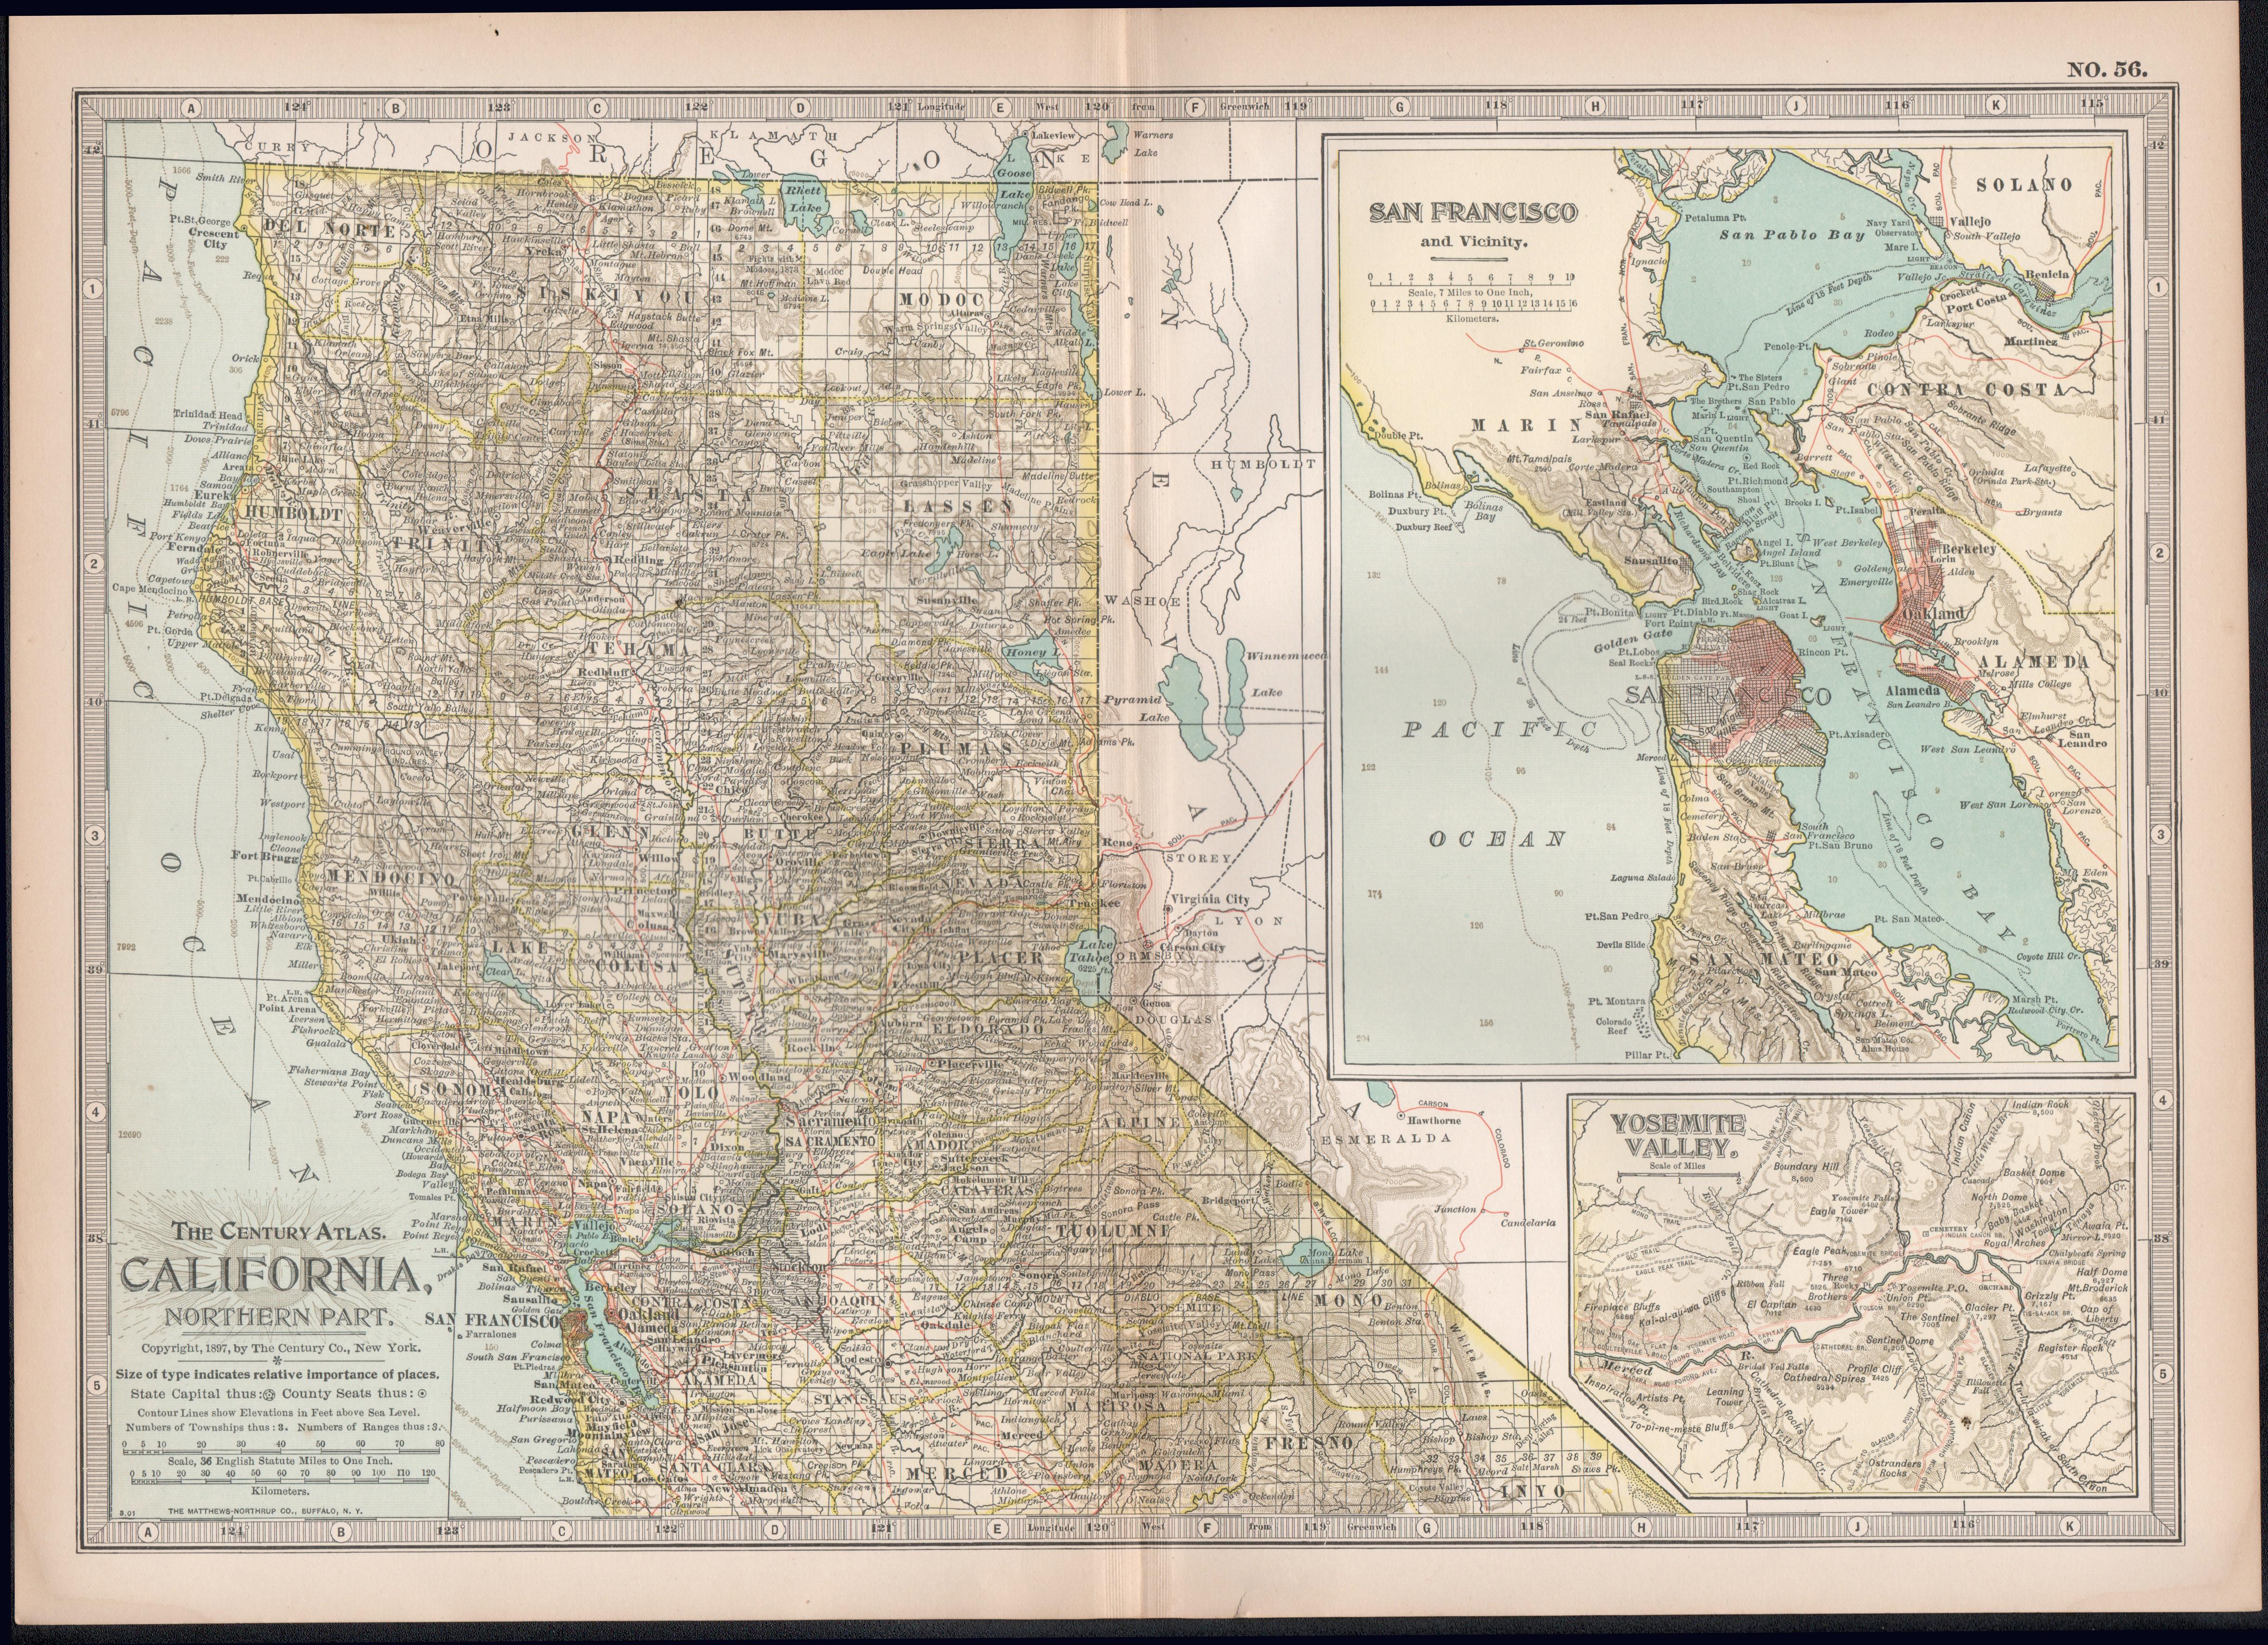 California, Northern Part. USA Century Atlas state antique vintage map - Print by Unknown